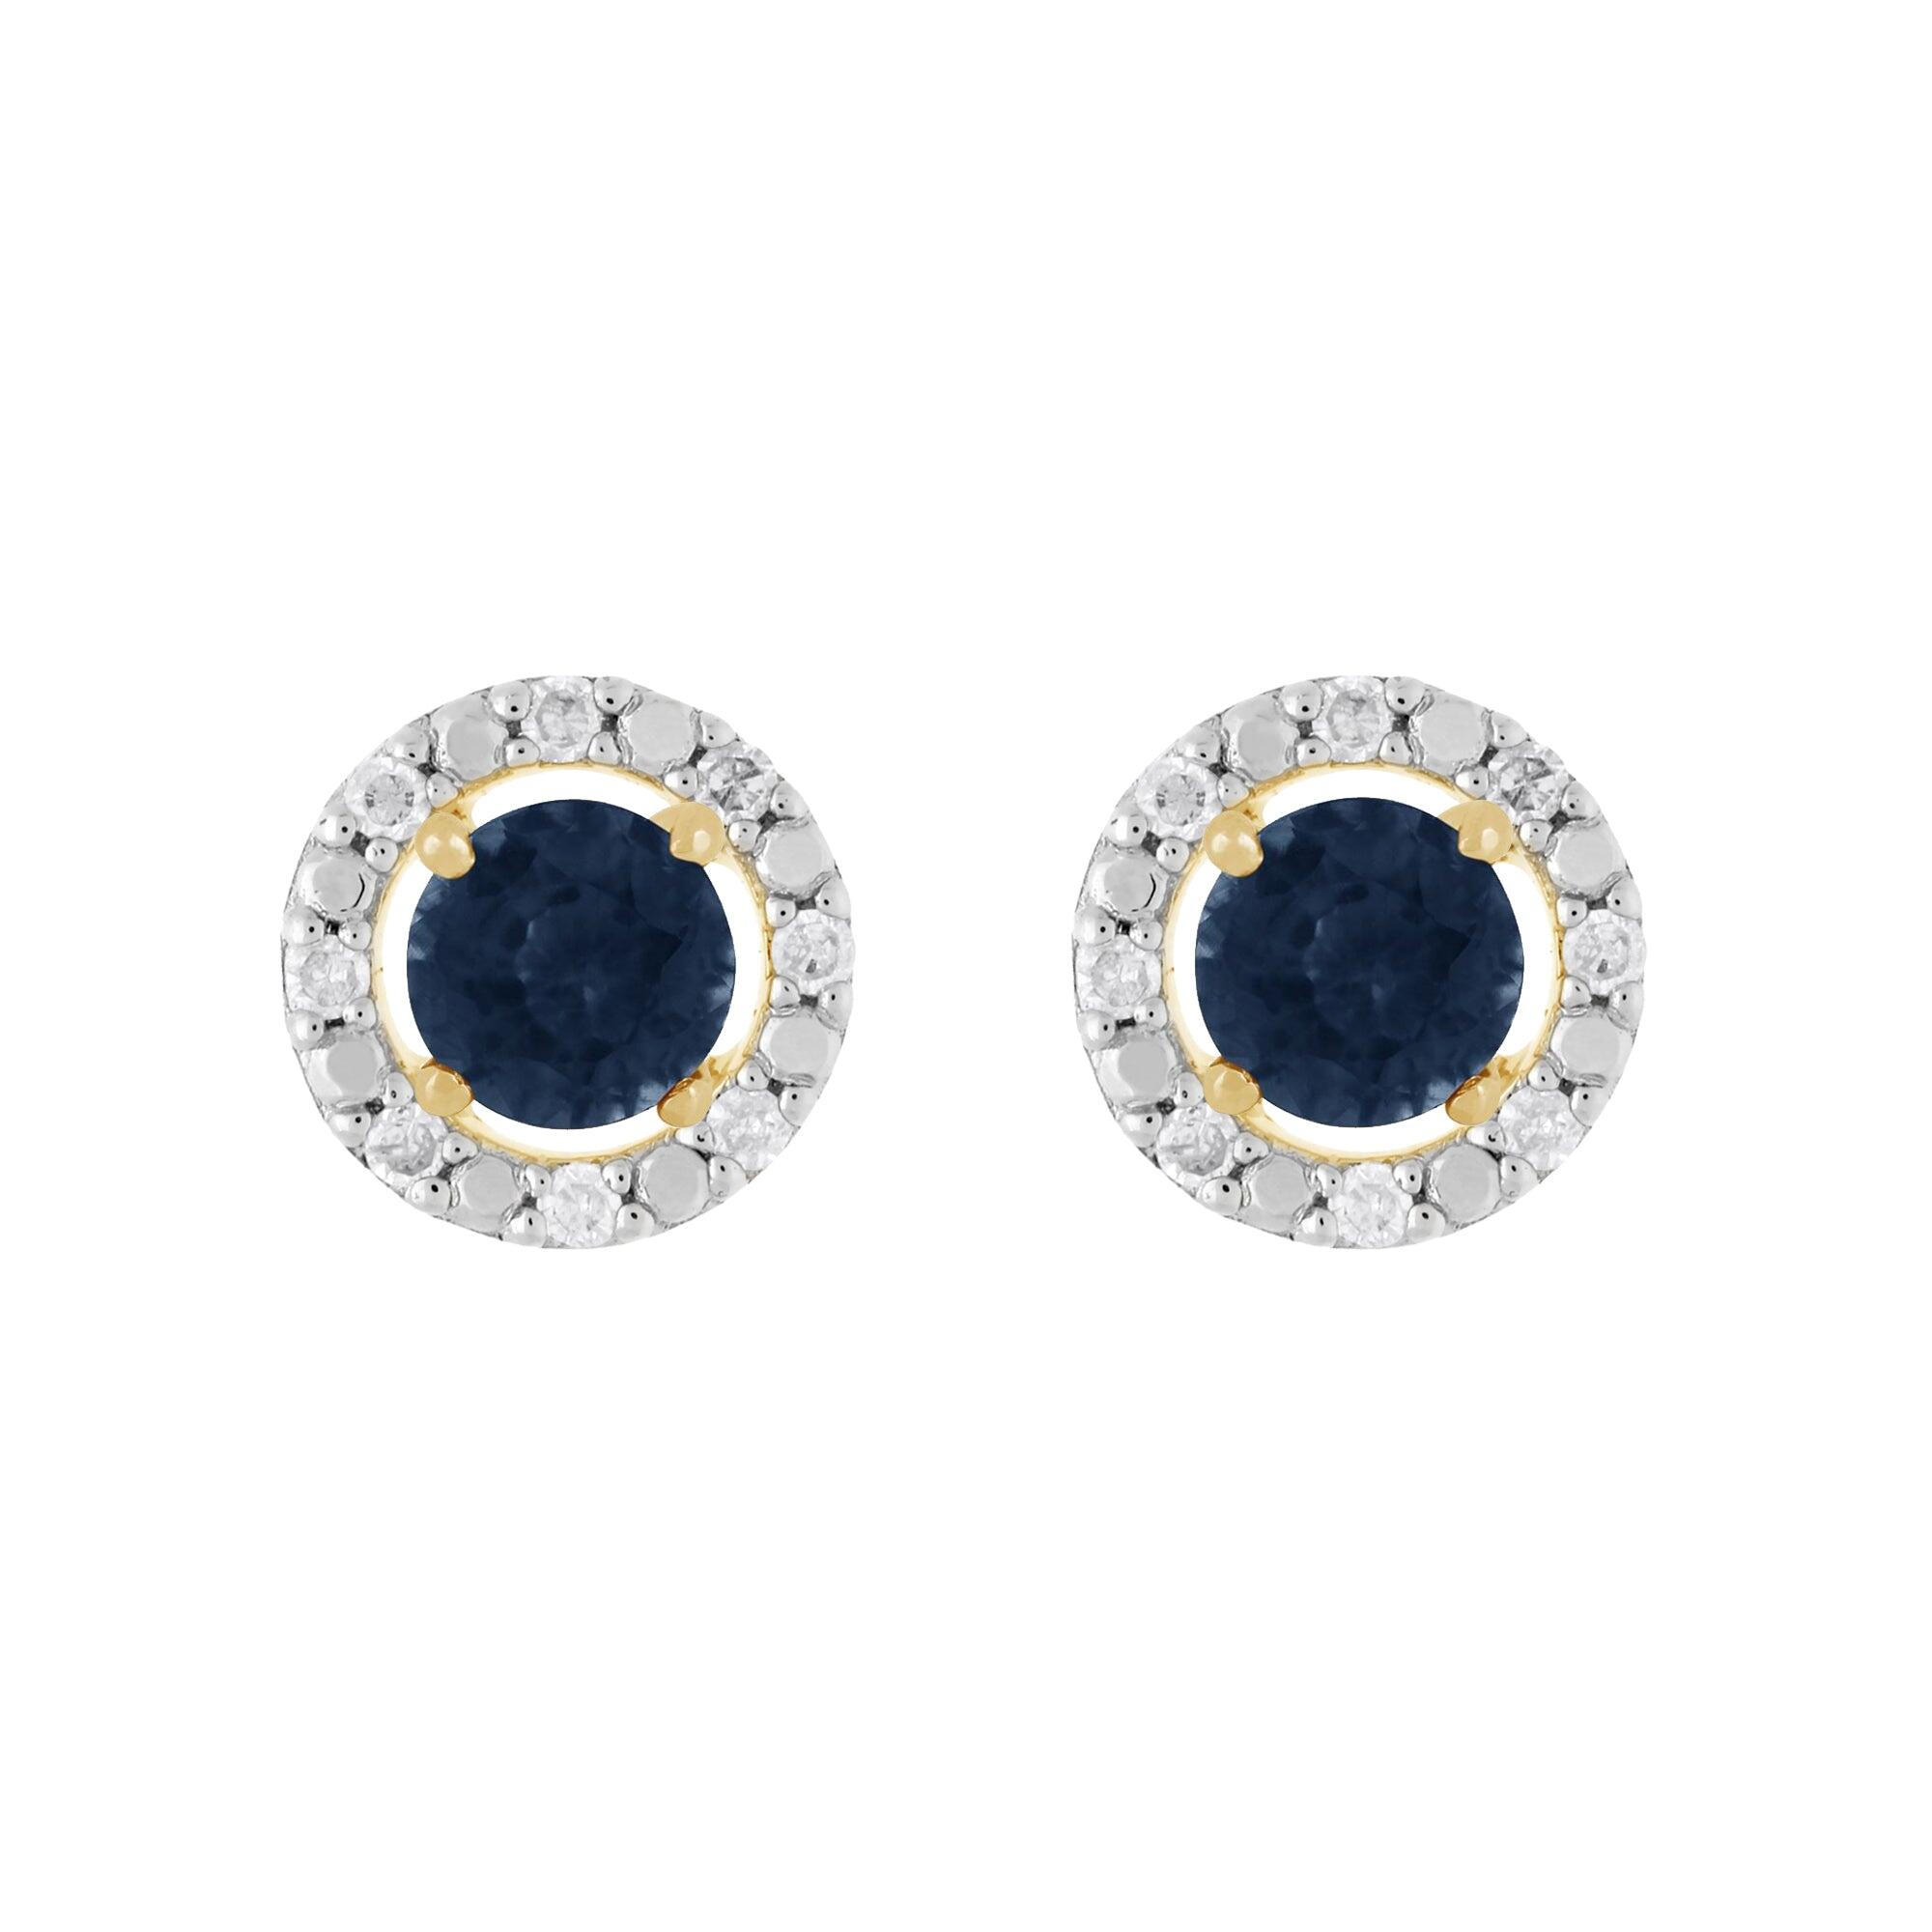 Classic Round Sapphire Stud Earrings with Detachable Diamond Round Earrings Jacket Set in 9ct Yellow Gold